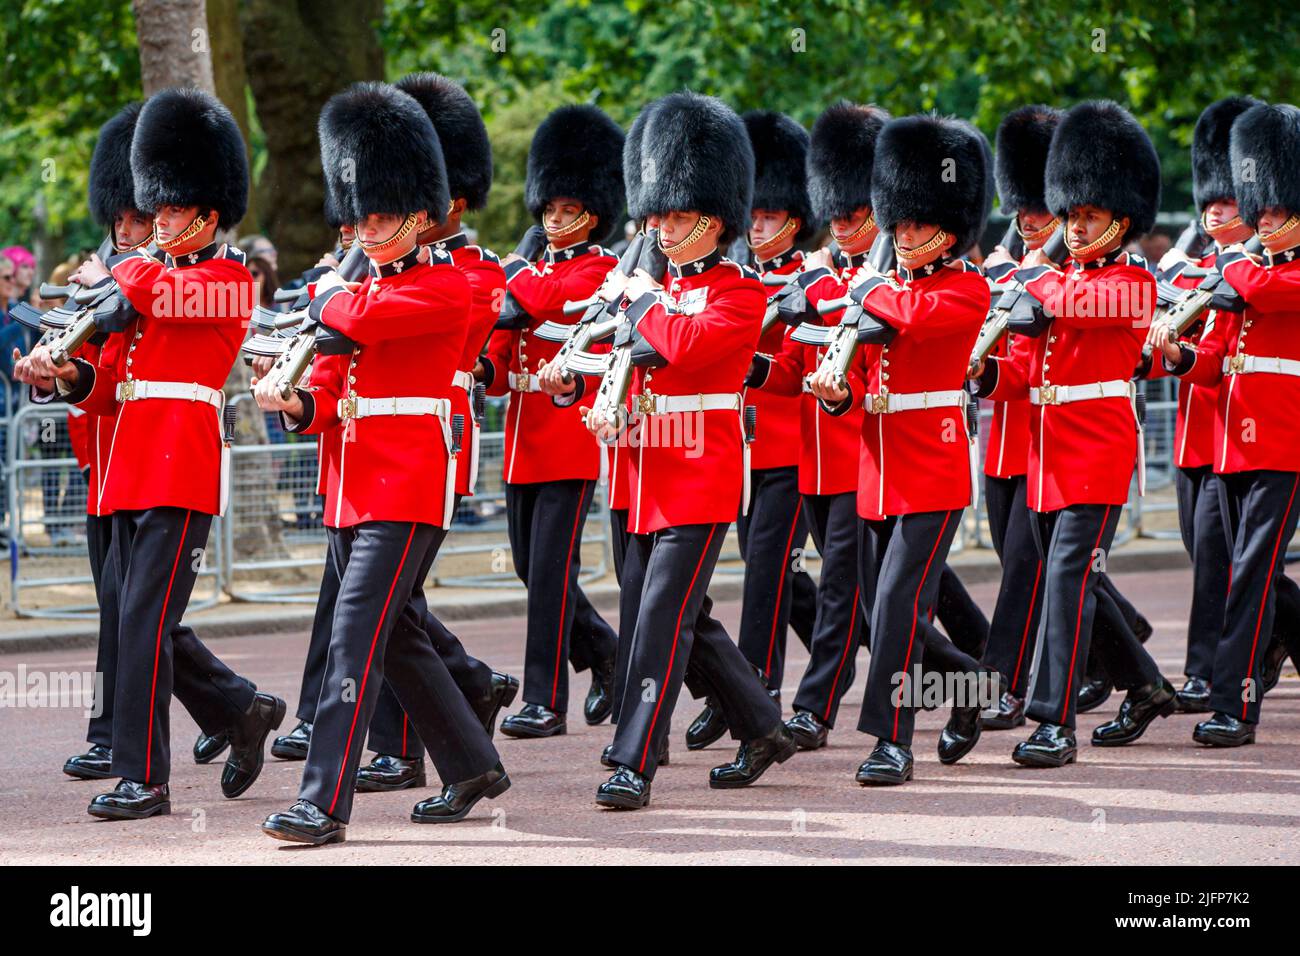 Irish Guards at Trooping the Color, Colonel’s Review in the Mall, London, England, Vereinigtes Königreich am Samstag, 28. Mai 2022.P Stockfoto